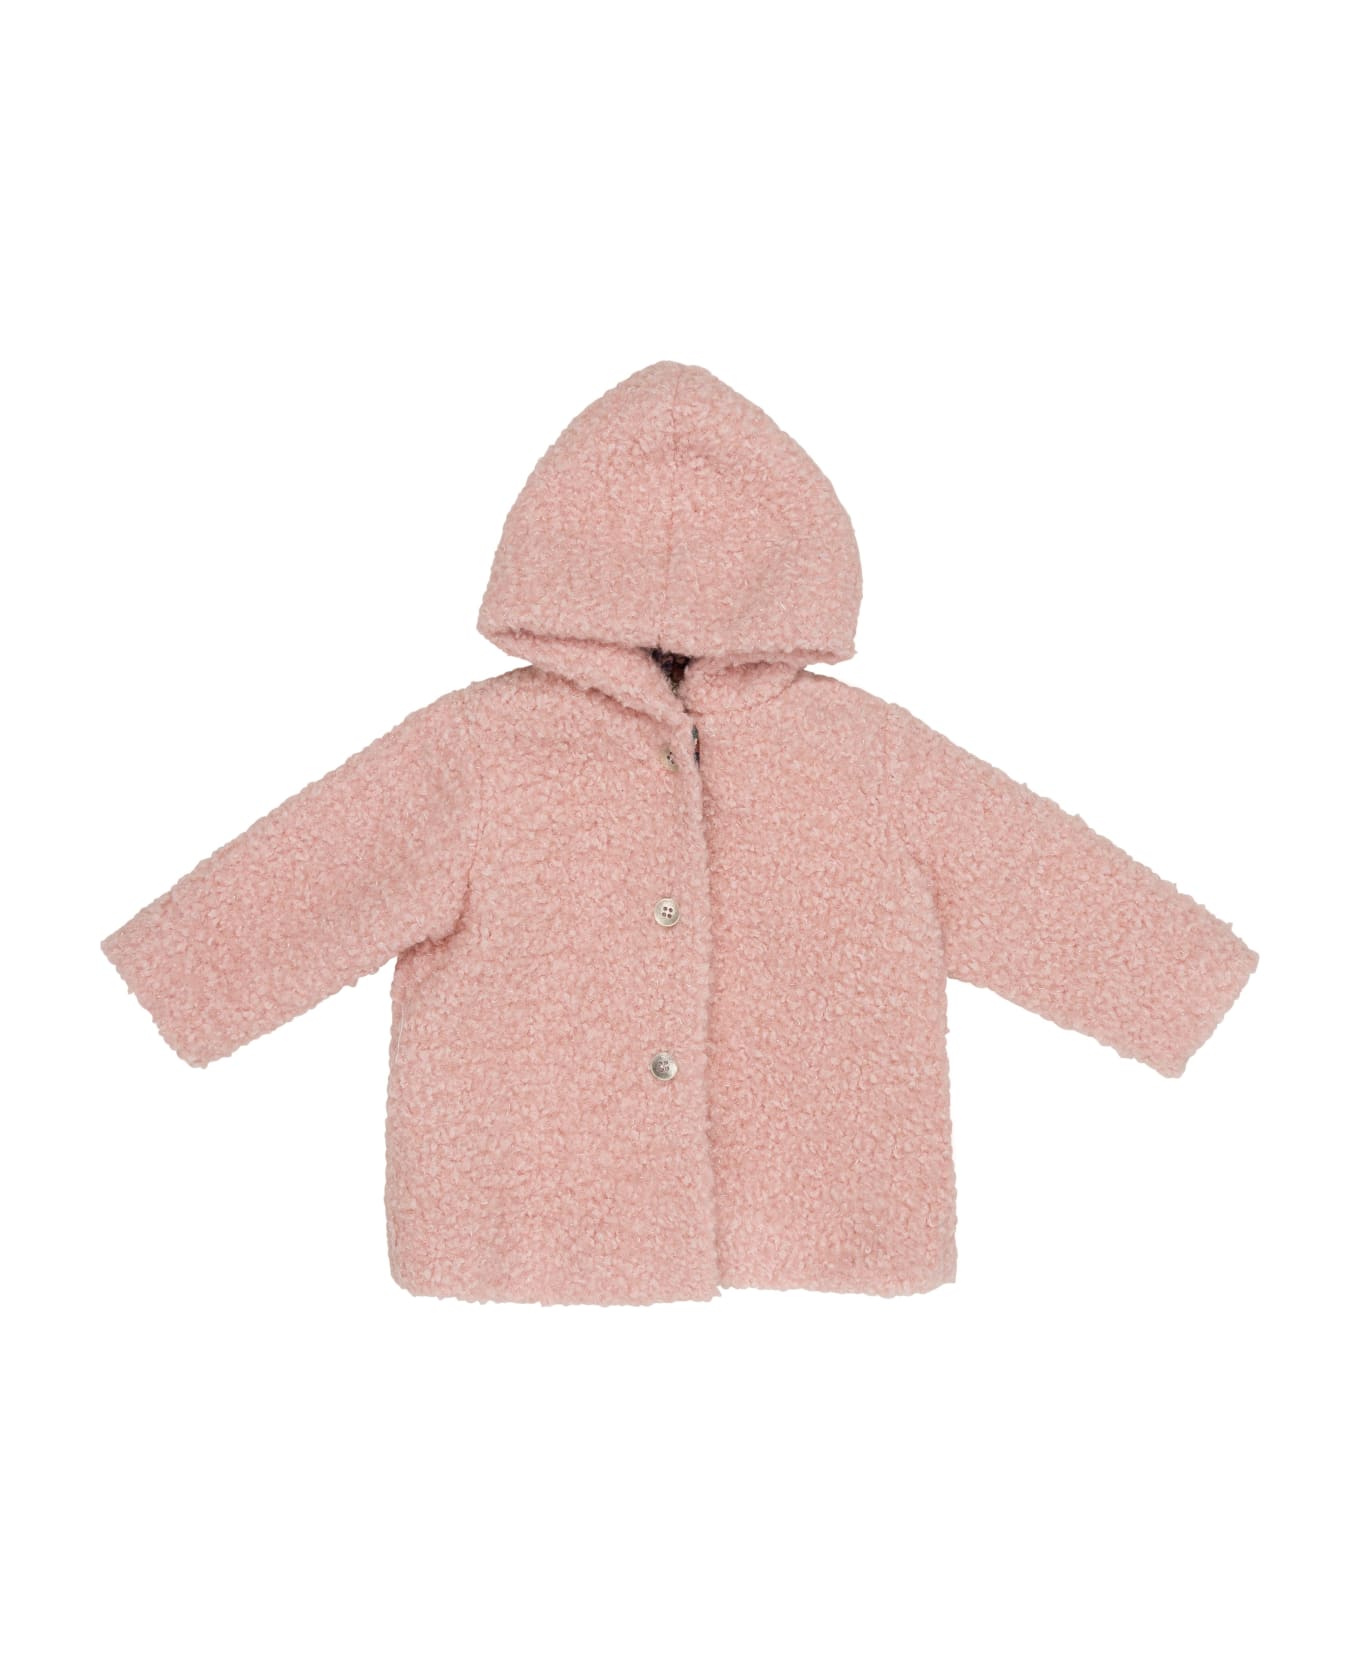 Caffe' d'Orzo Coat With Hood - Pink コート＆ジャケット